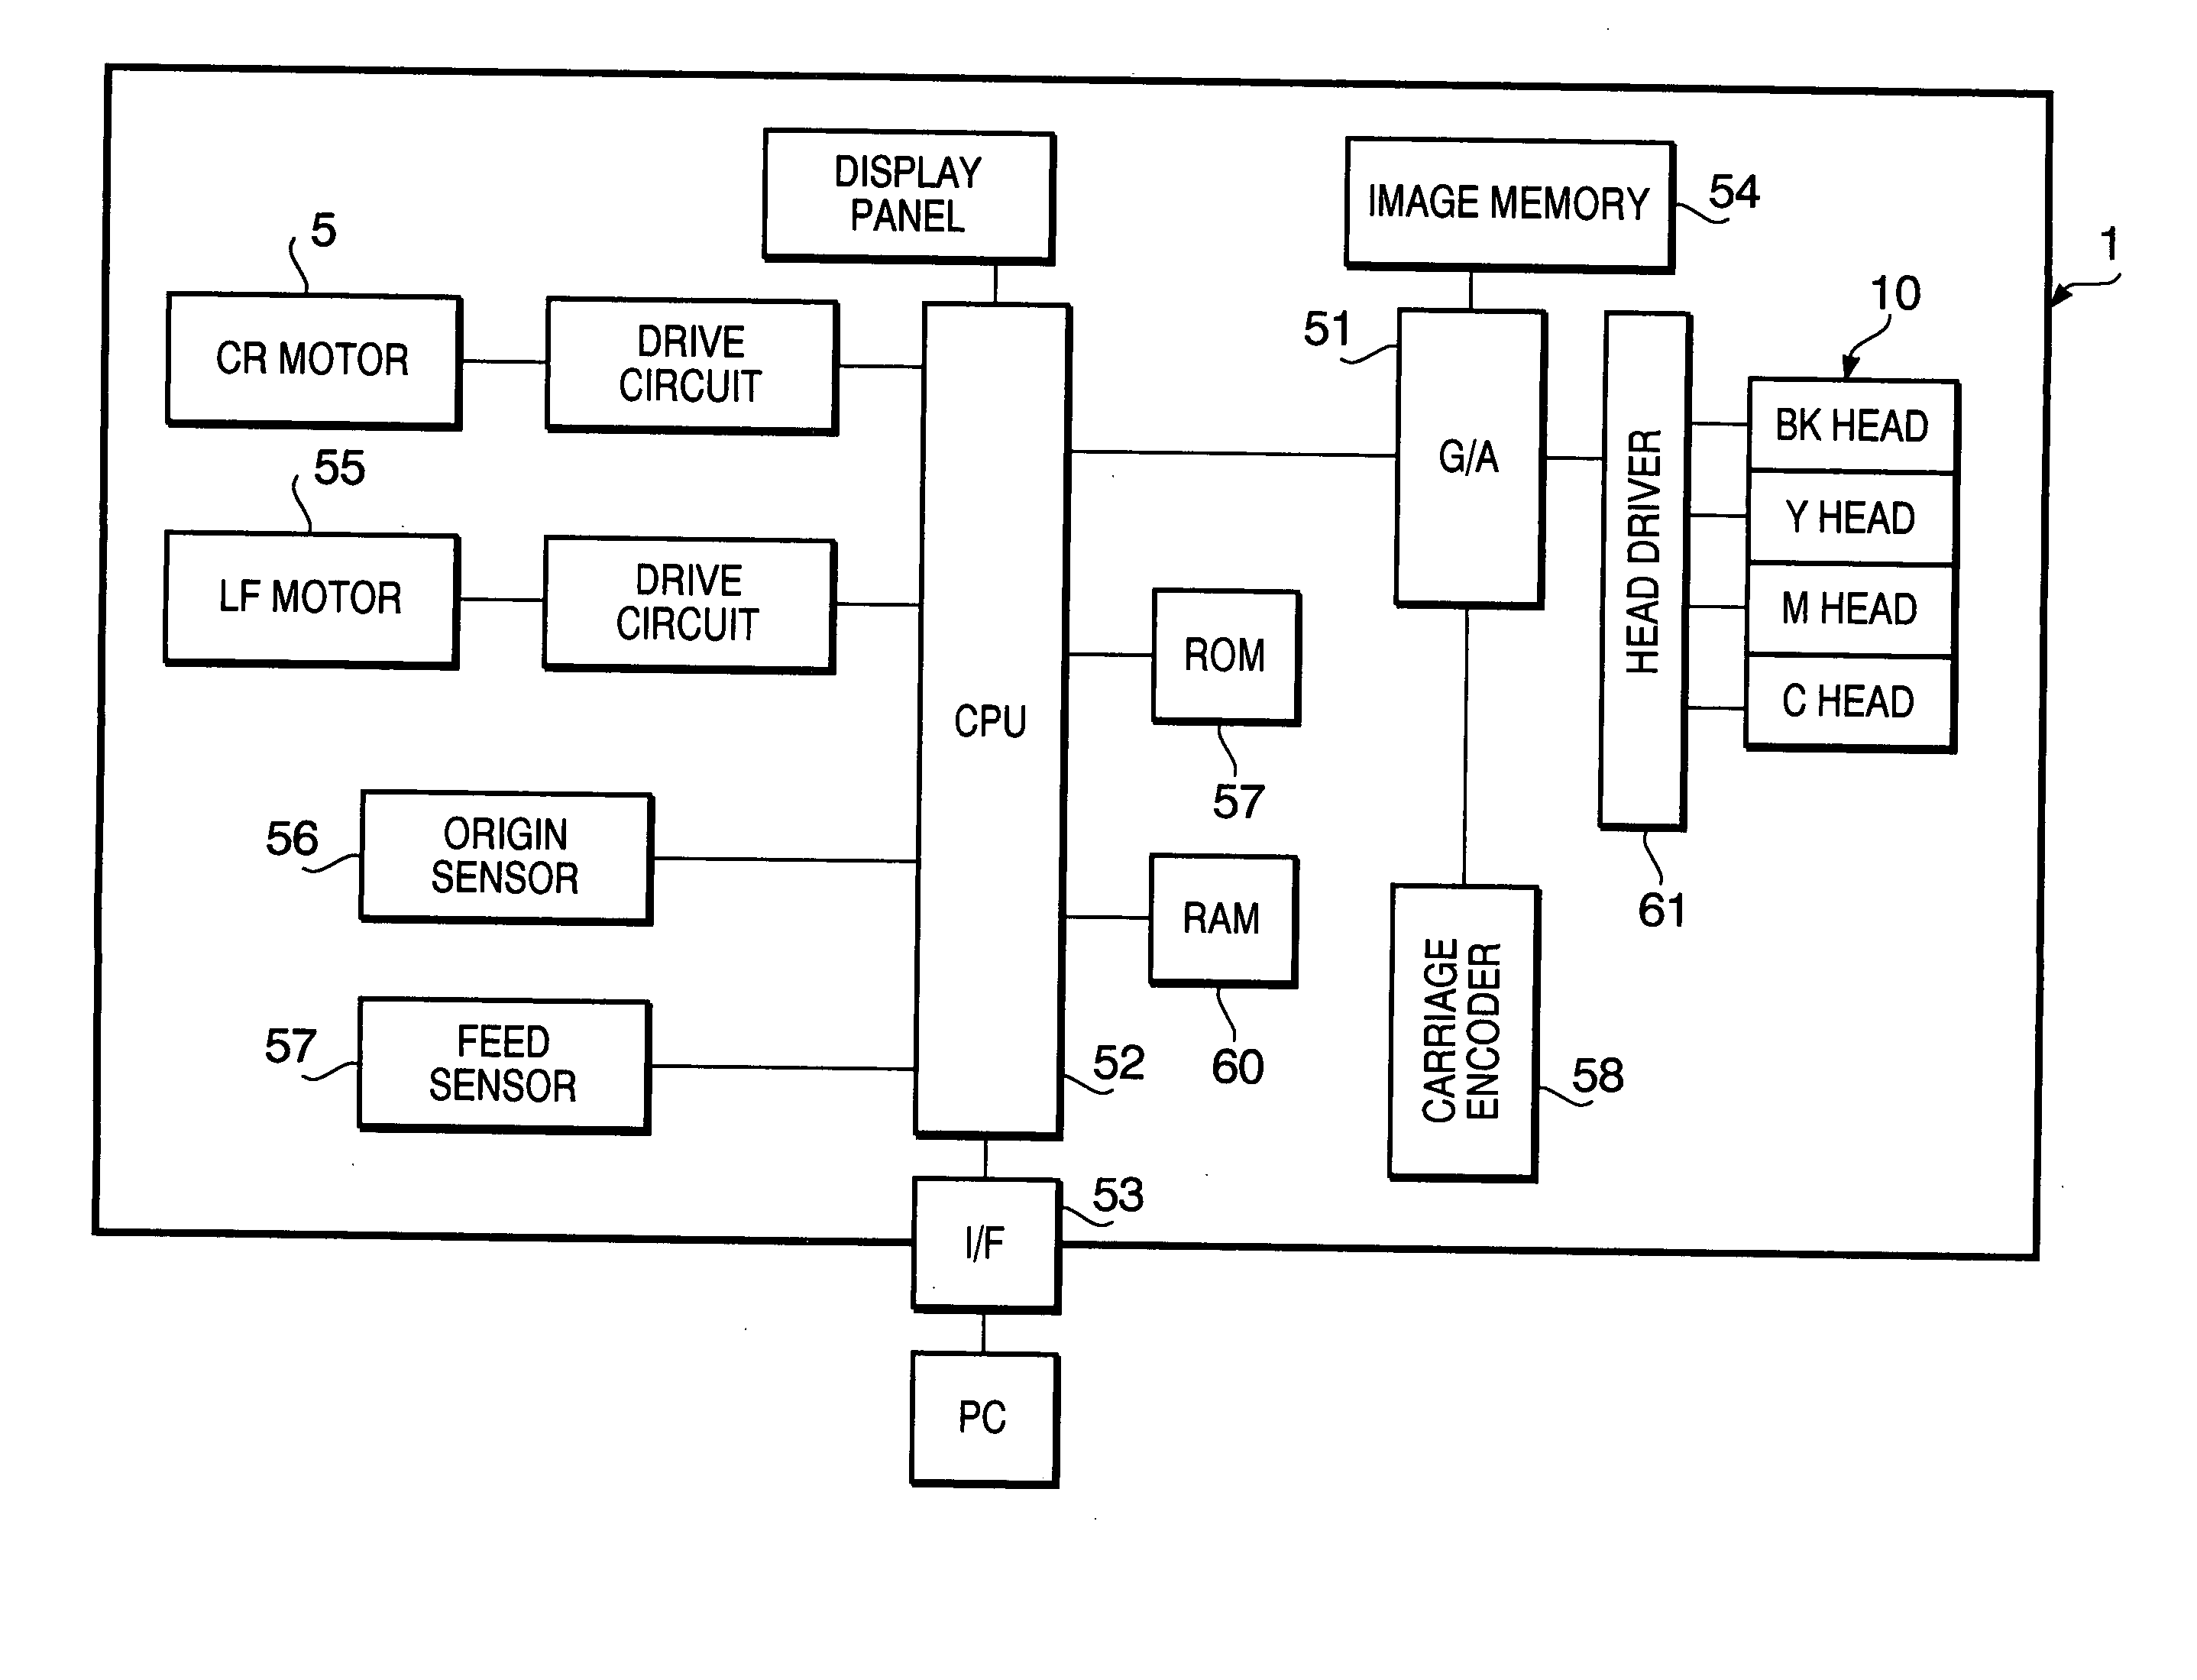 Ink ejection method and inkjet ejection device